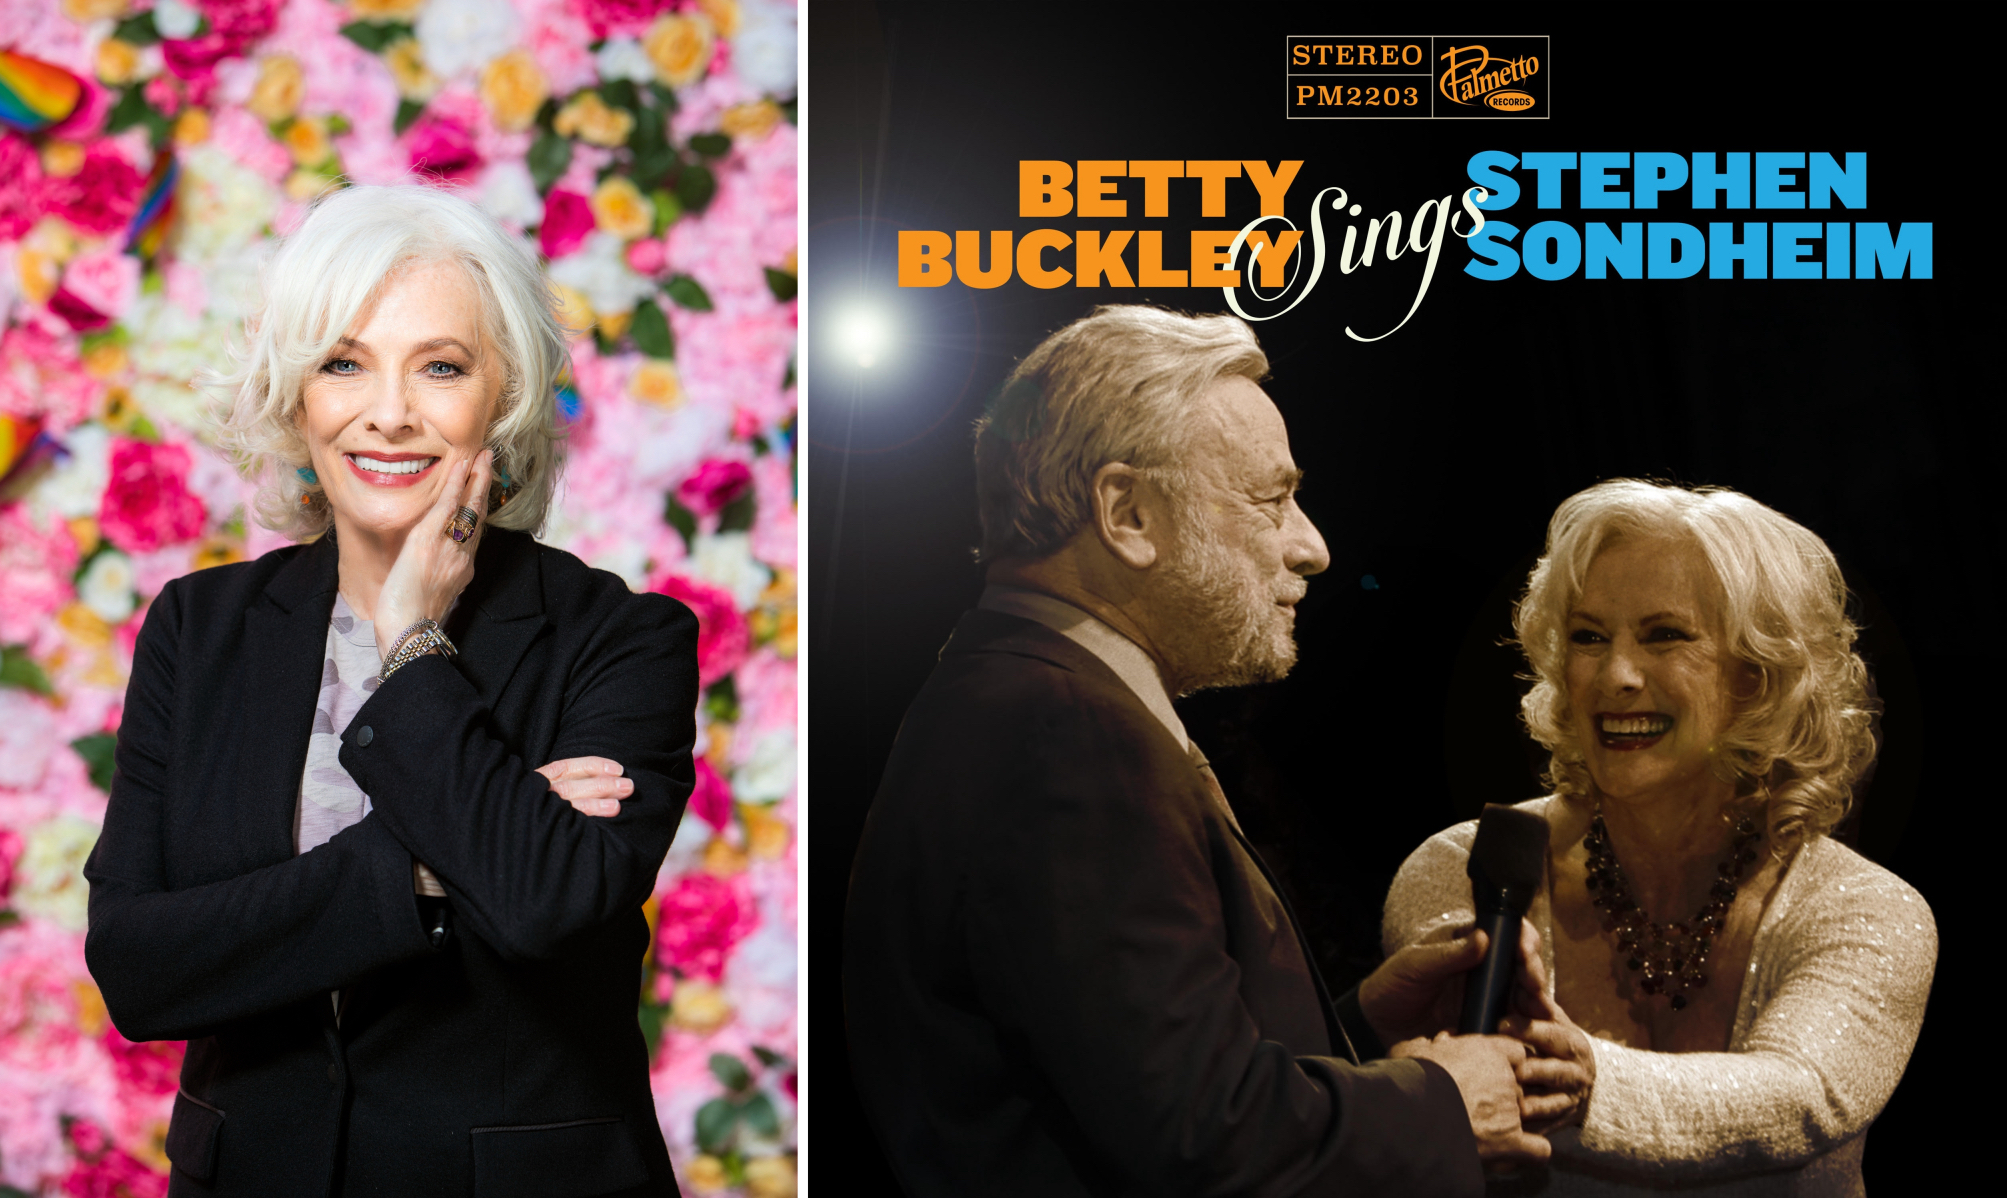 Betty Buckley Pays Tribute To Stephen Sondheim With Her New Album